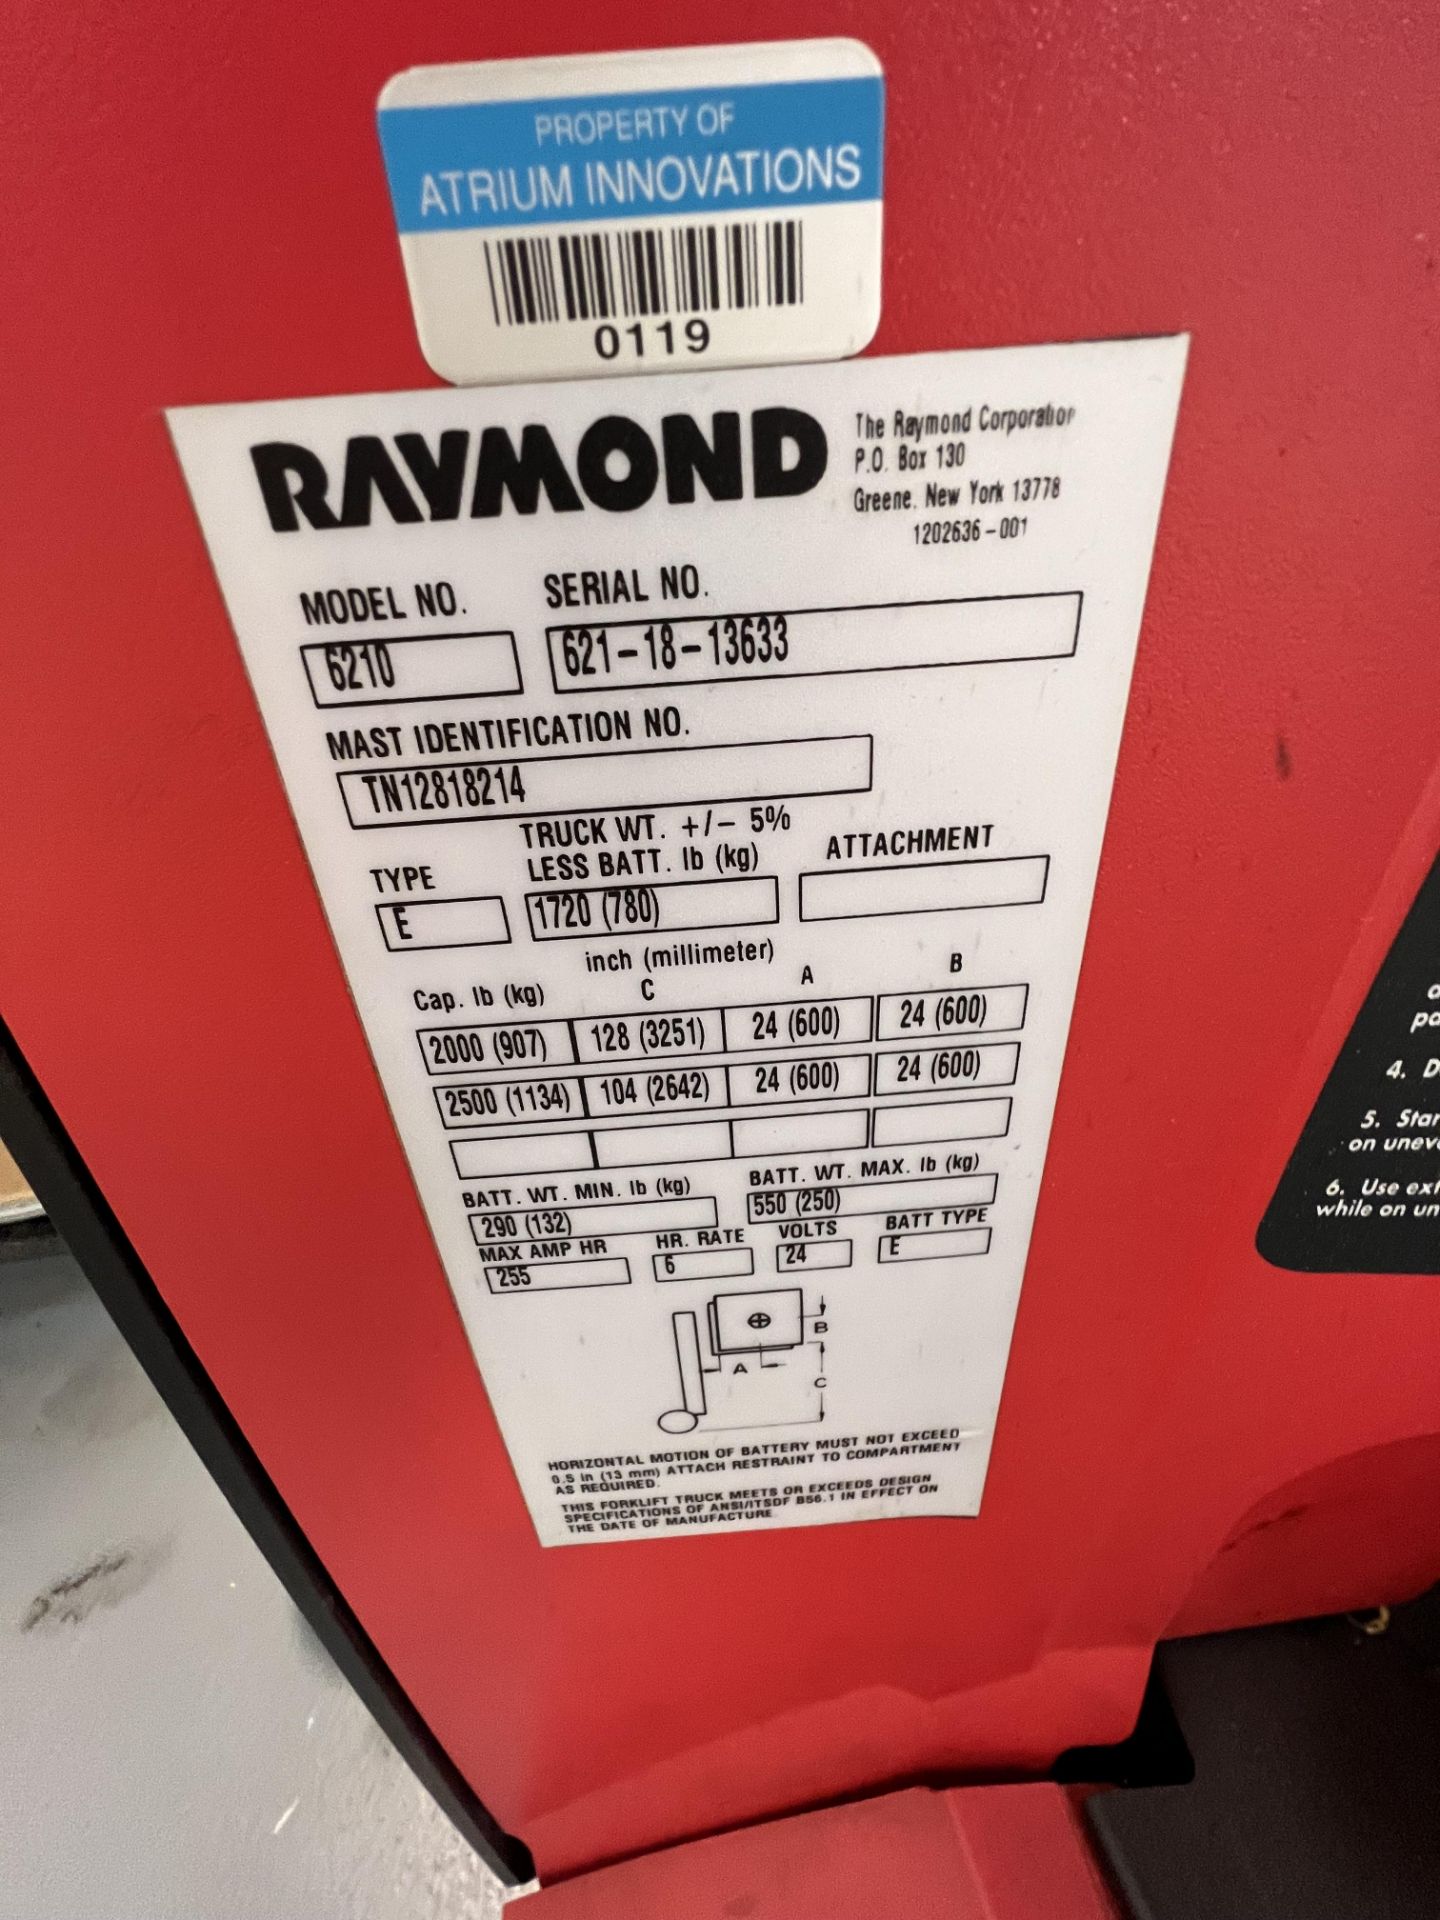 RAYMOND ELECTRIC WALK-BEHIND PALLET JACK, MODEL 6210, S/N 621-18-13633(SOLD SUBJECT TO CONFIRMATIO - Image 9 of 10